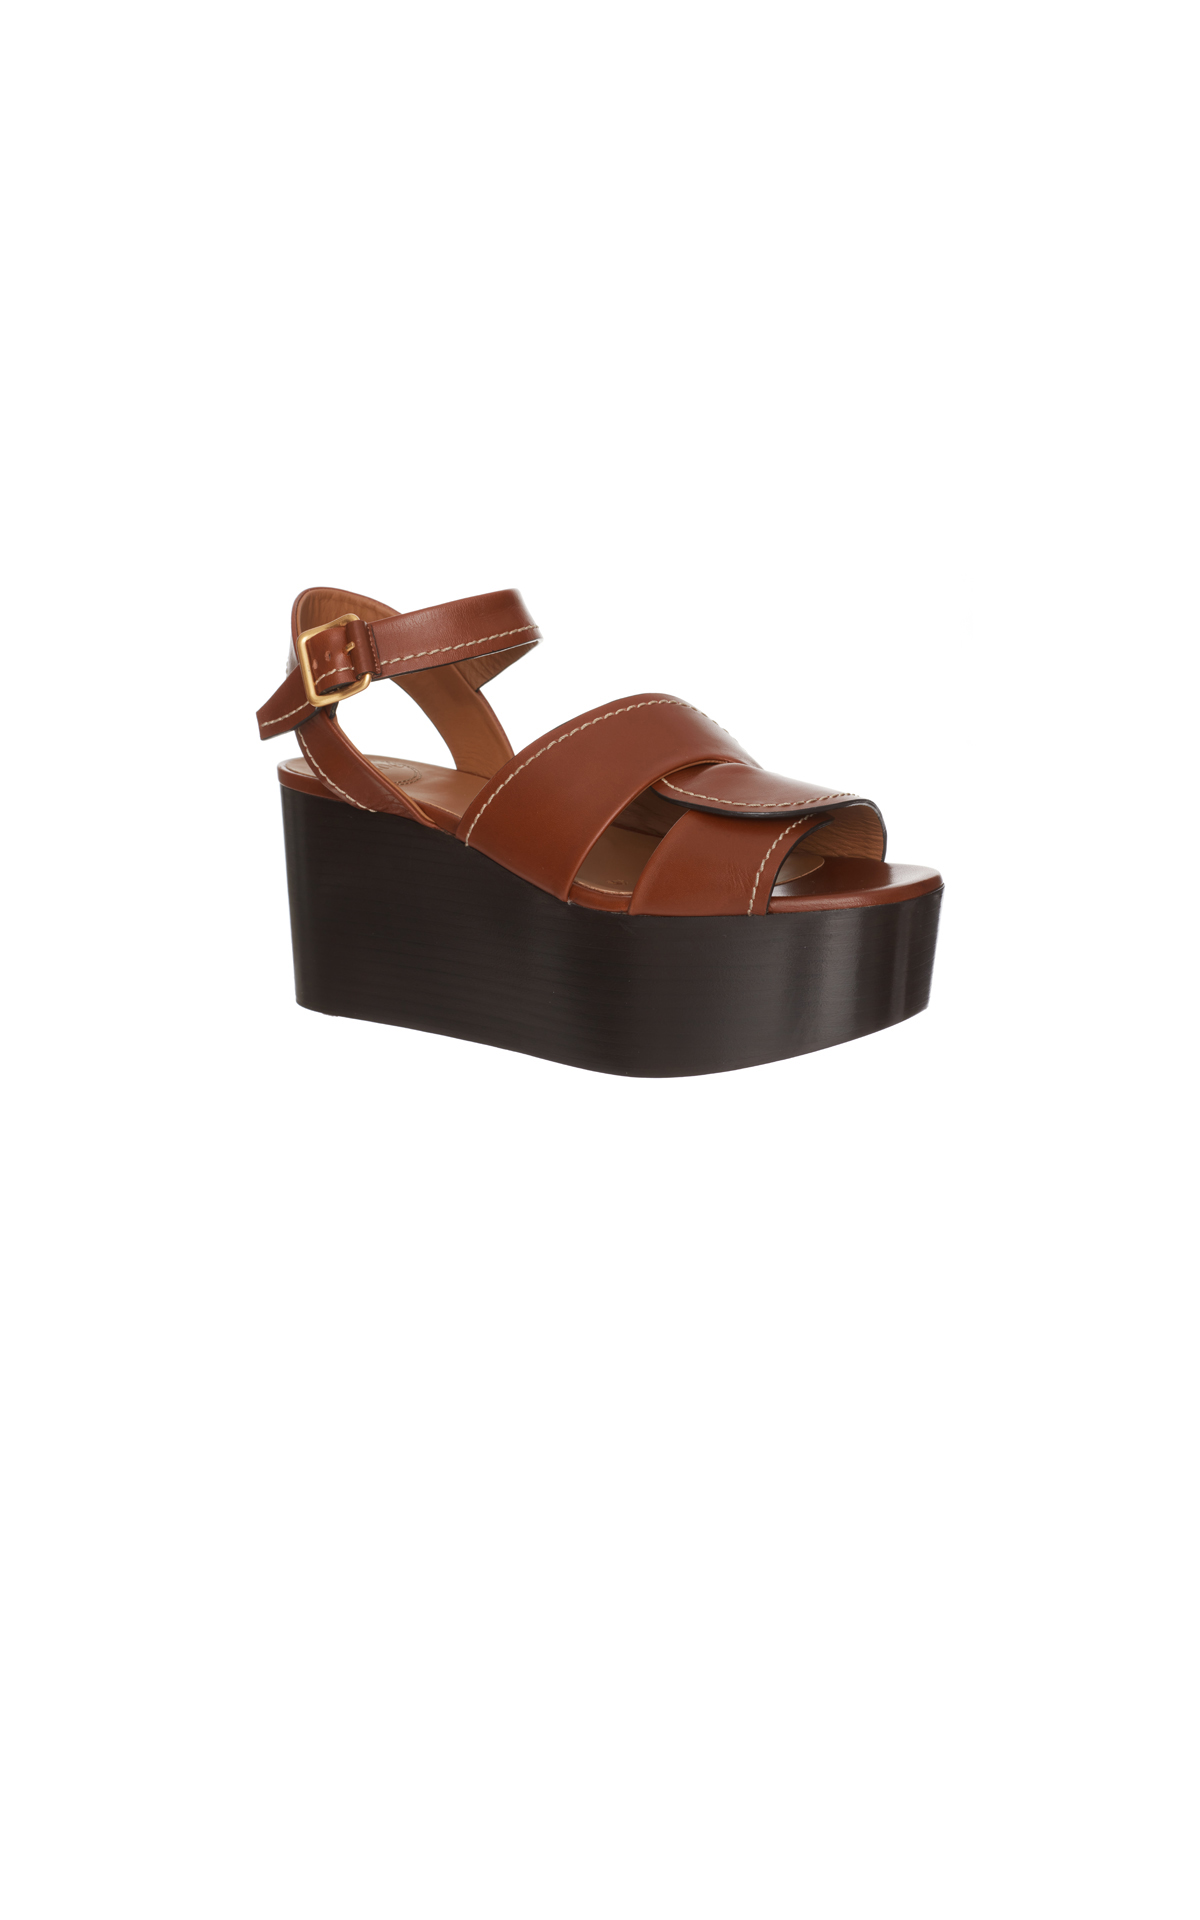 Chloé Sepia brown sandals from Bicester Village